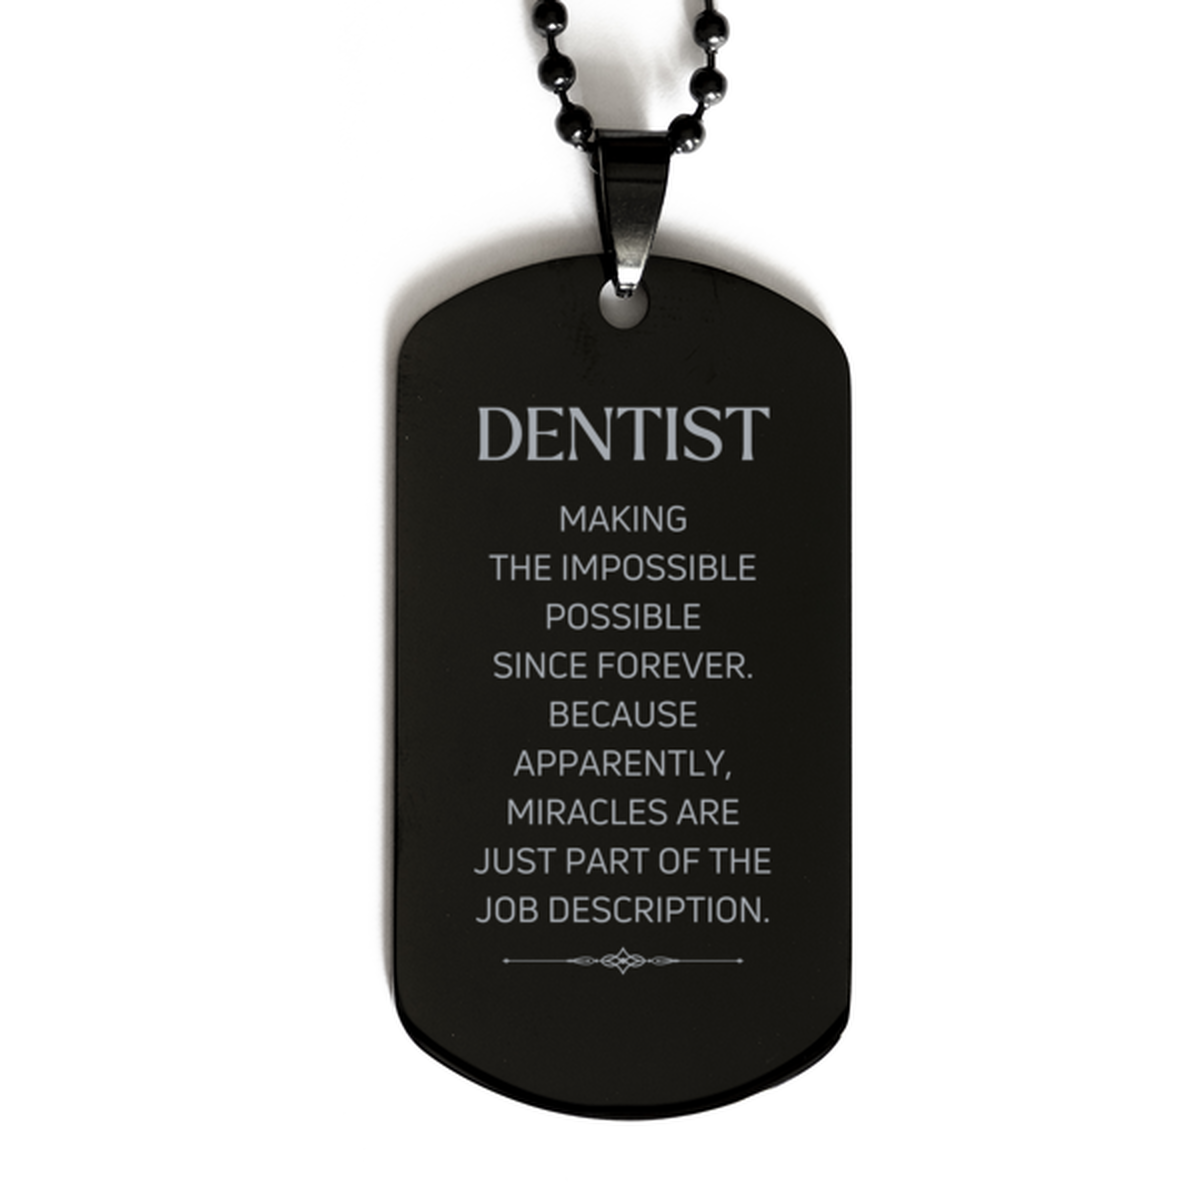 Funny Dentist Gifts, Miracles are just part of the job description, Inspirational Birthday Black Dog Tag For Dentist, Men, Women, Coworkers, Friends, Boss